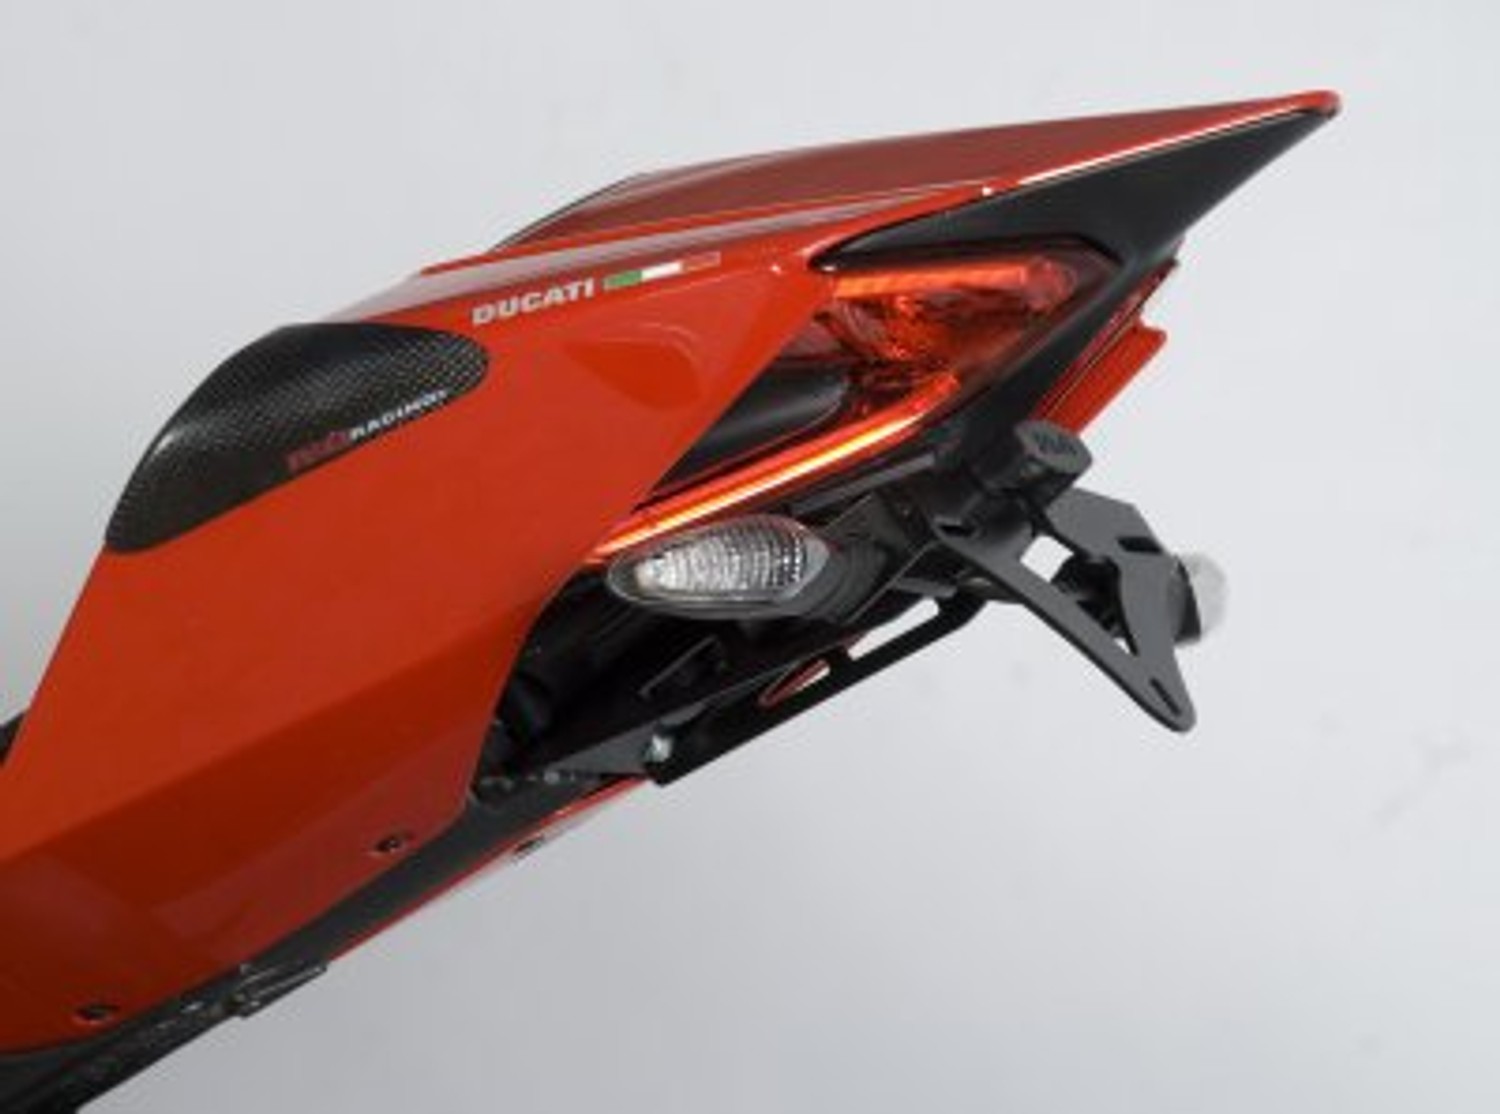 Support de plaque d/'immatriculation DUCATI PANIGALE 899 959 1199 Réglable Adjustable Tail Tidy